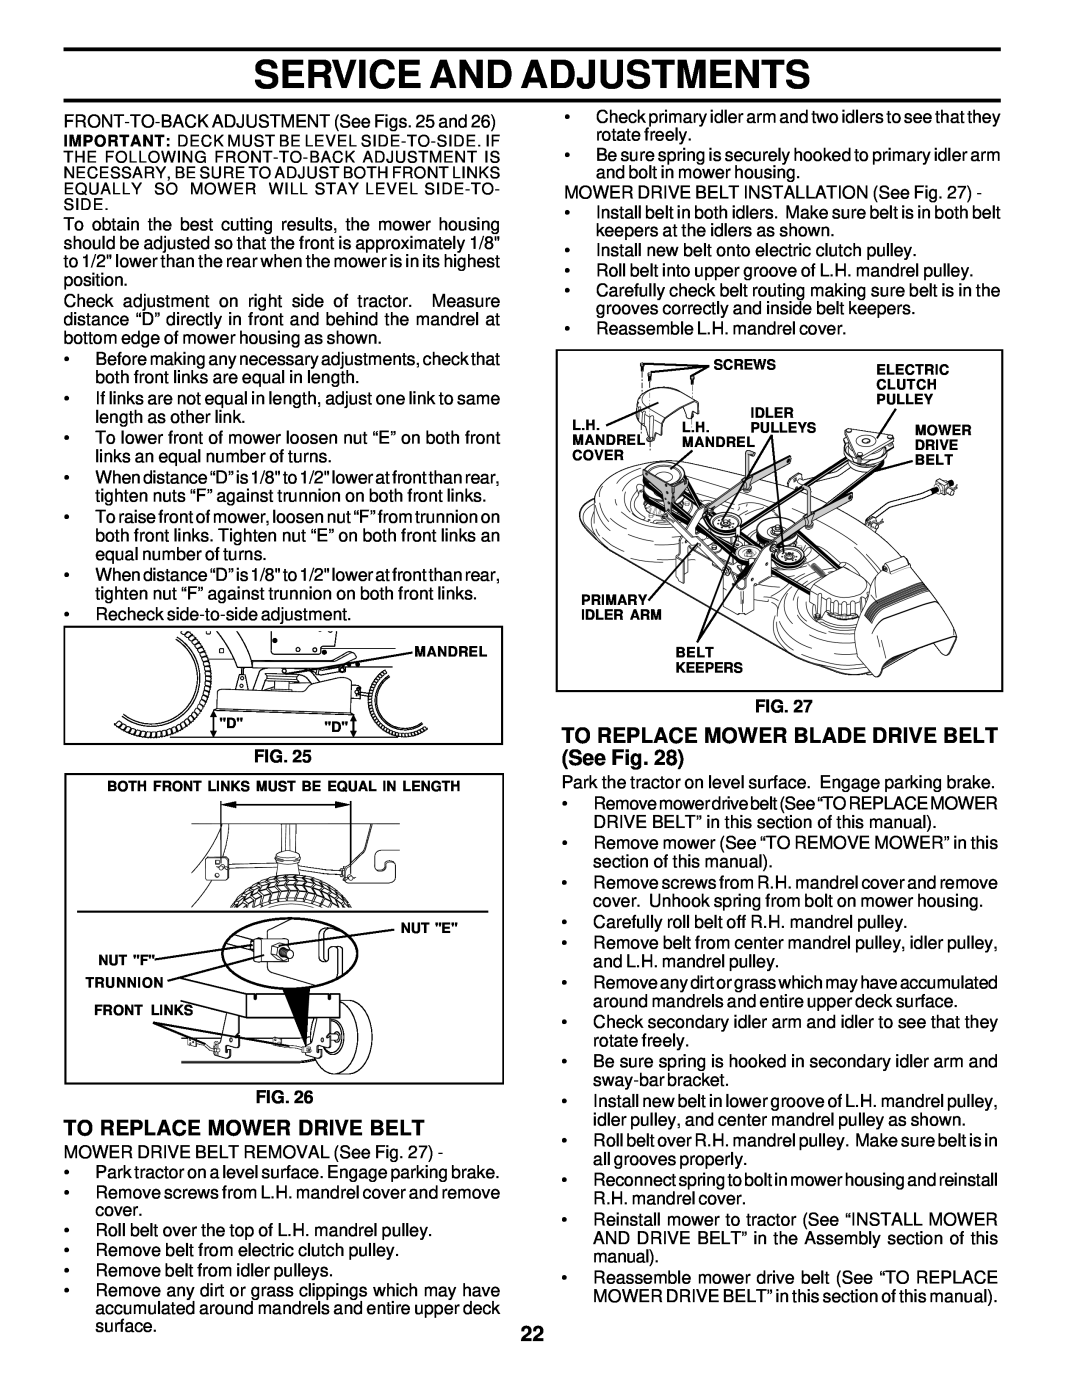 Poulan DPR22H46STB To Replace Mower Drive Belt, TO REPLACE MOWER BLADE DRIVE BELT See Fig, Service And Adjustments 